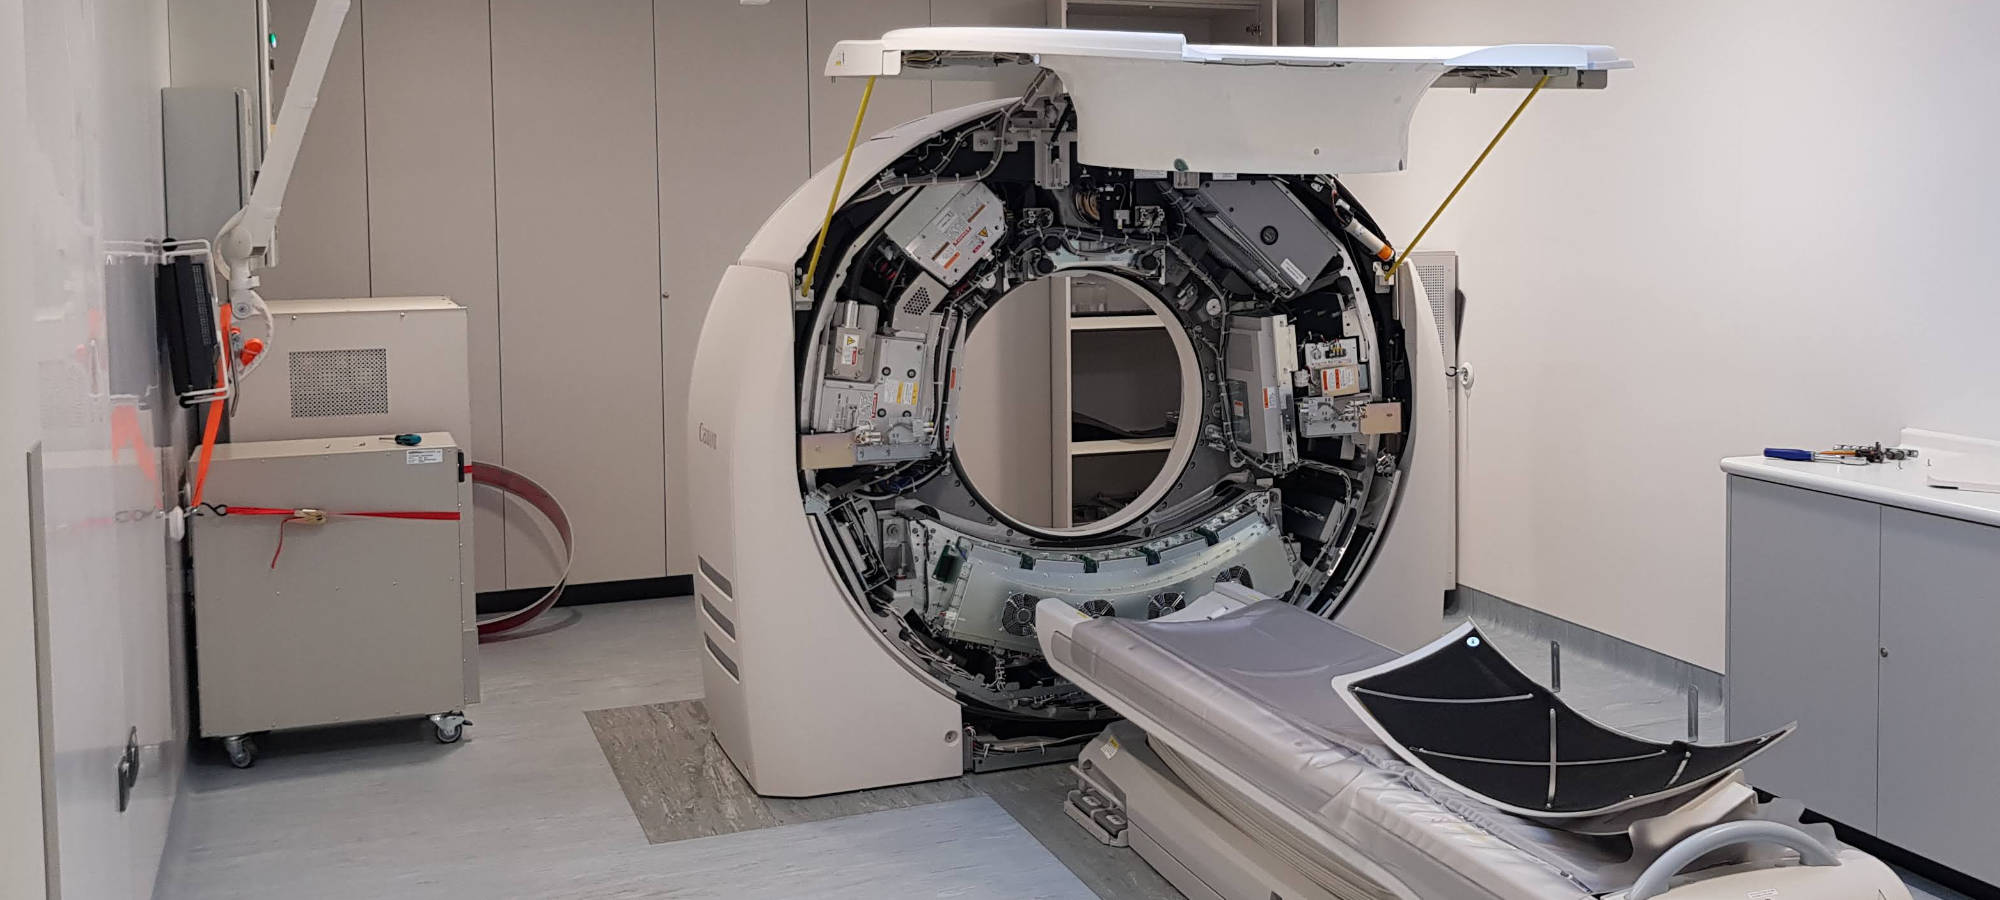 CT scanner being installed by Imaging Matters from Leamington Spa